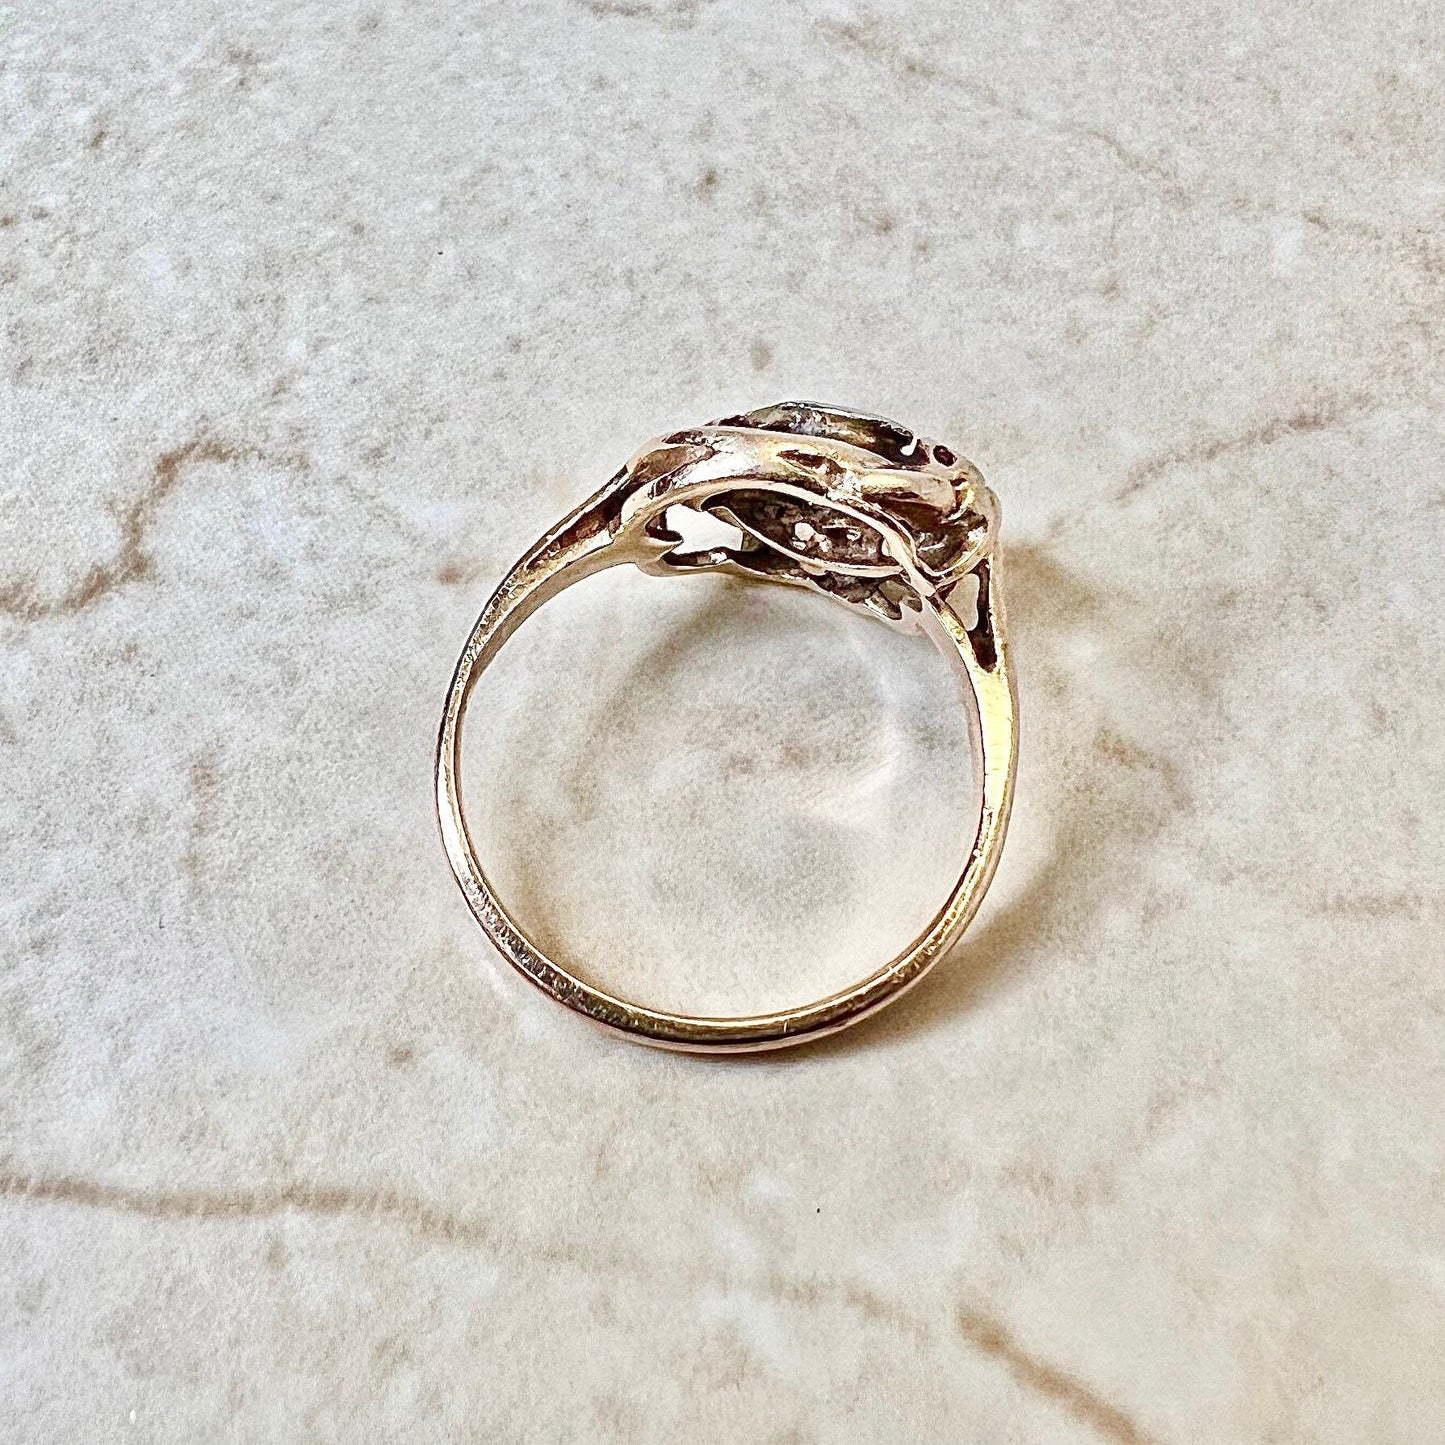 14K Vintage Retro Diamond & Ruby Seashell Cocktail Ring - Rose Gold Ruby Ring - Heart Ring - Gold Retro Ring - Valentine’s Day Gifts For Her